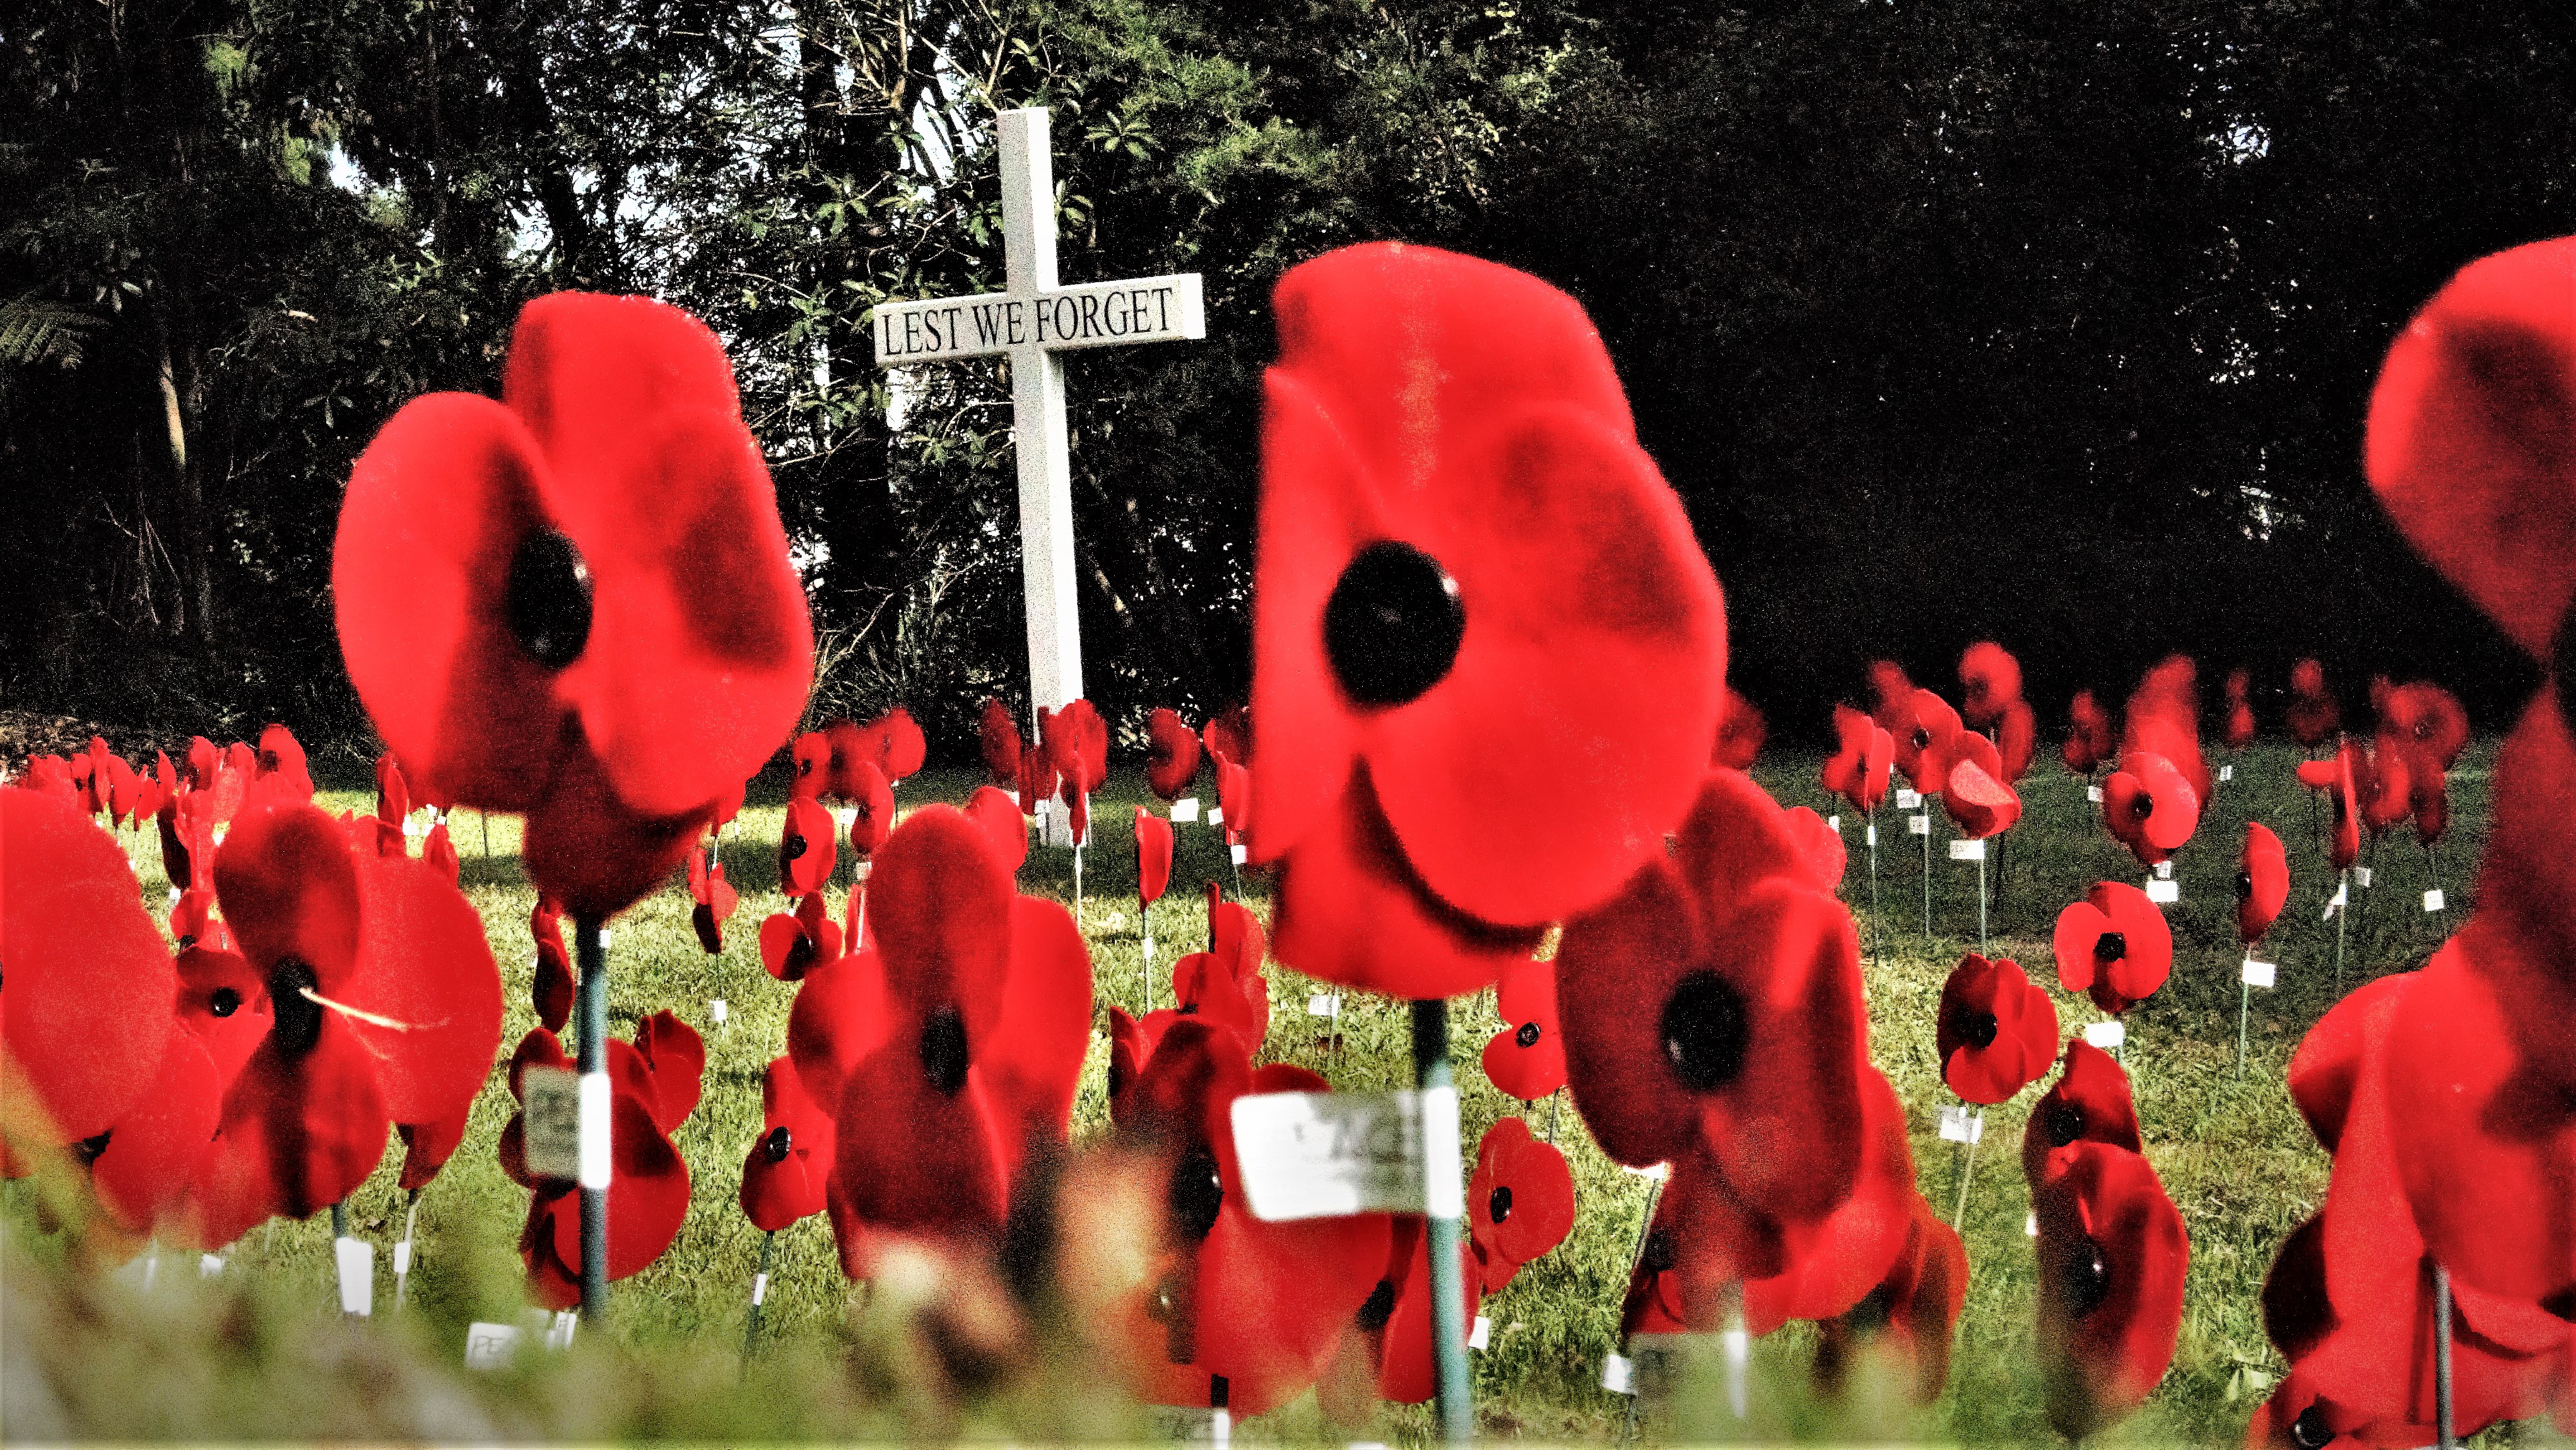 RSAs hope to sell poppies for Armistice Day | Star News